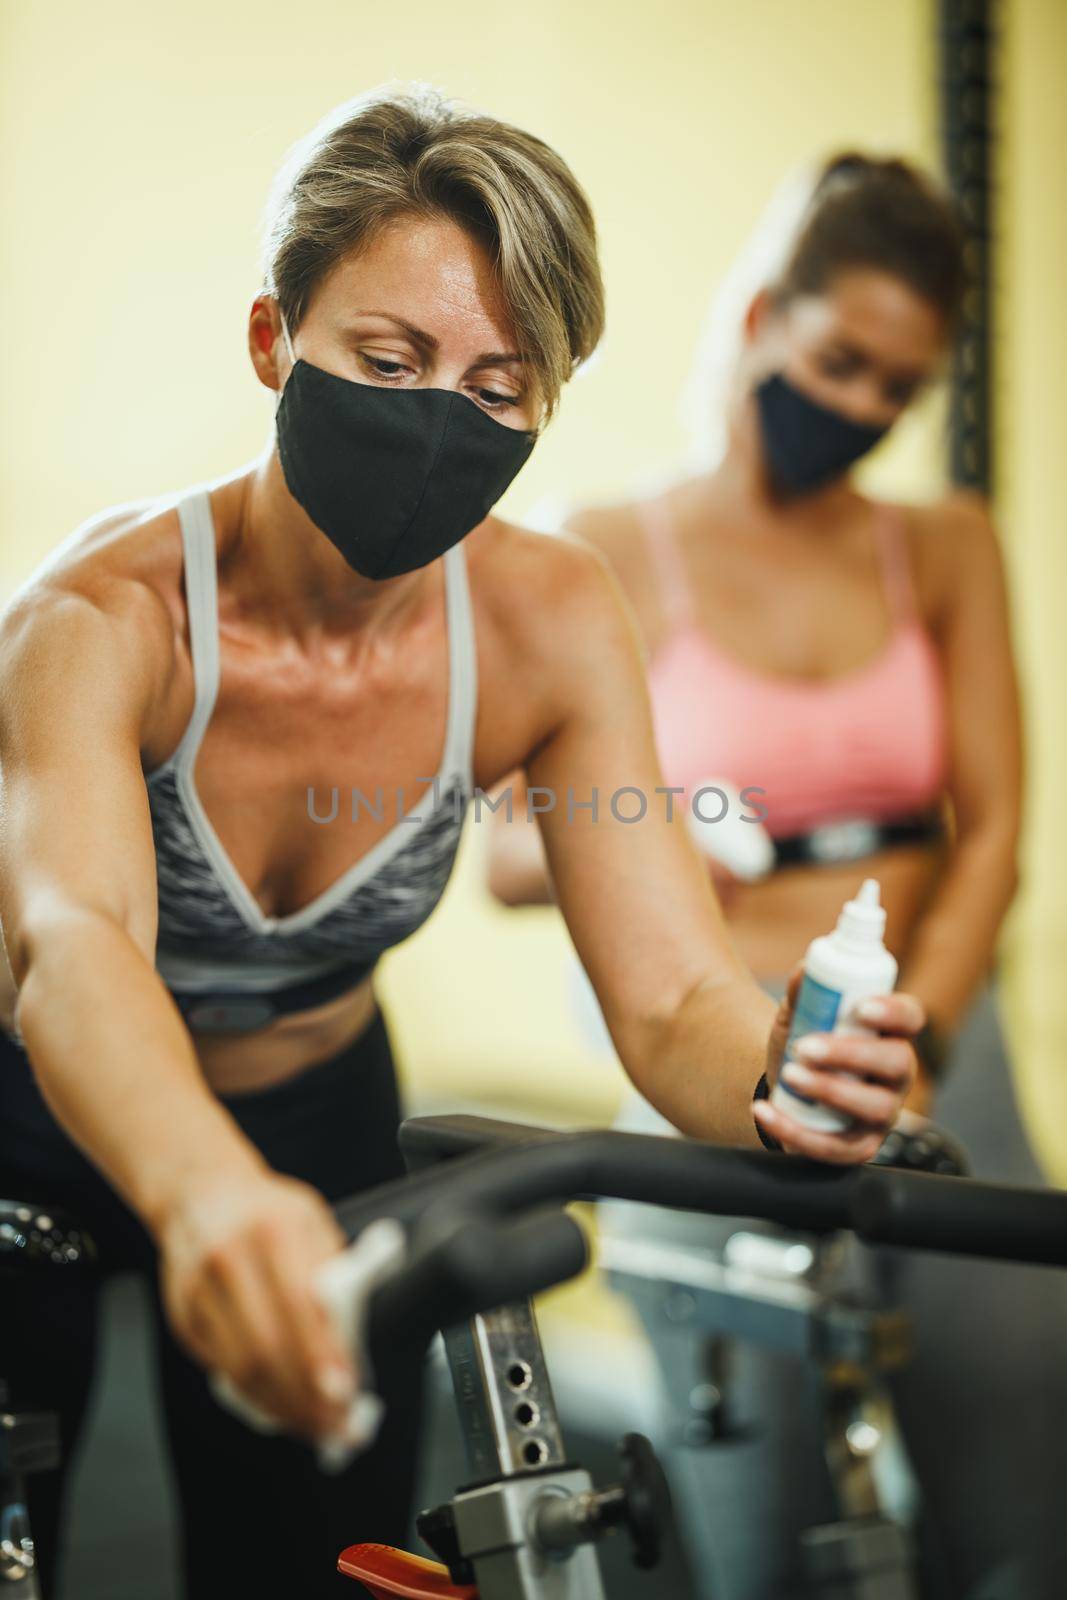 Shot of a muscular young woman with protective mask cleaning fitness gym equipment afther workout during Covid-19 pandemic.